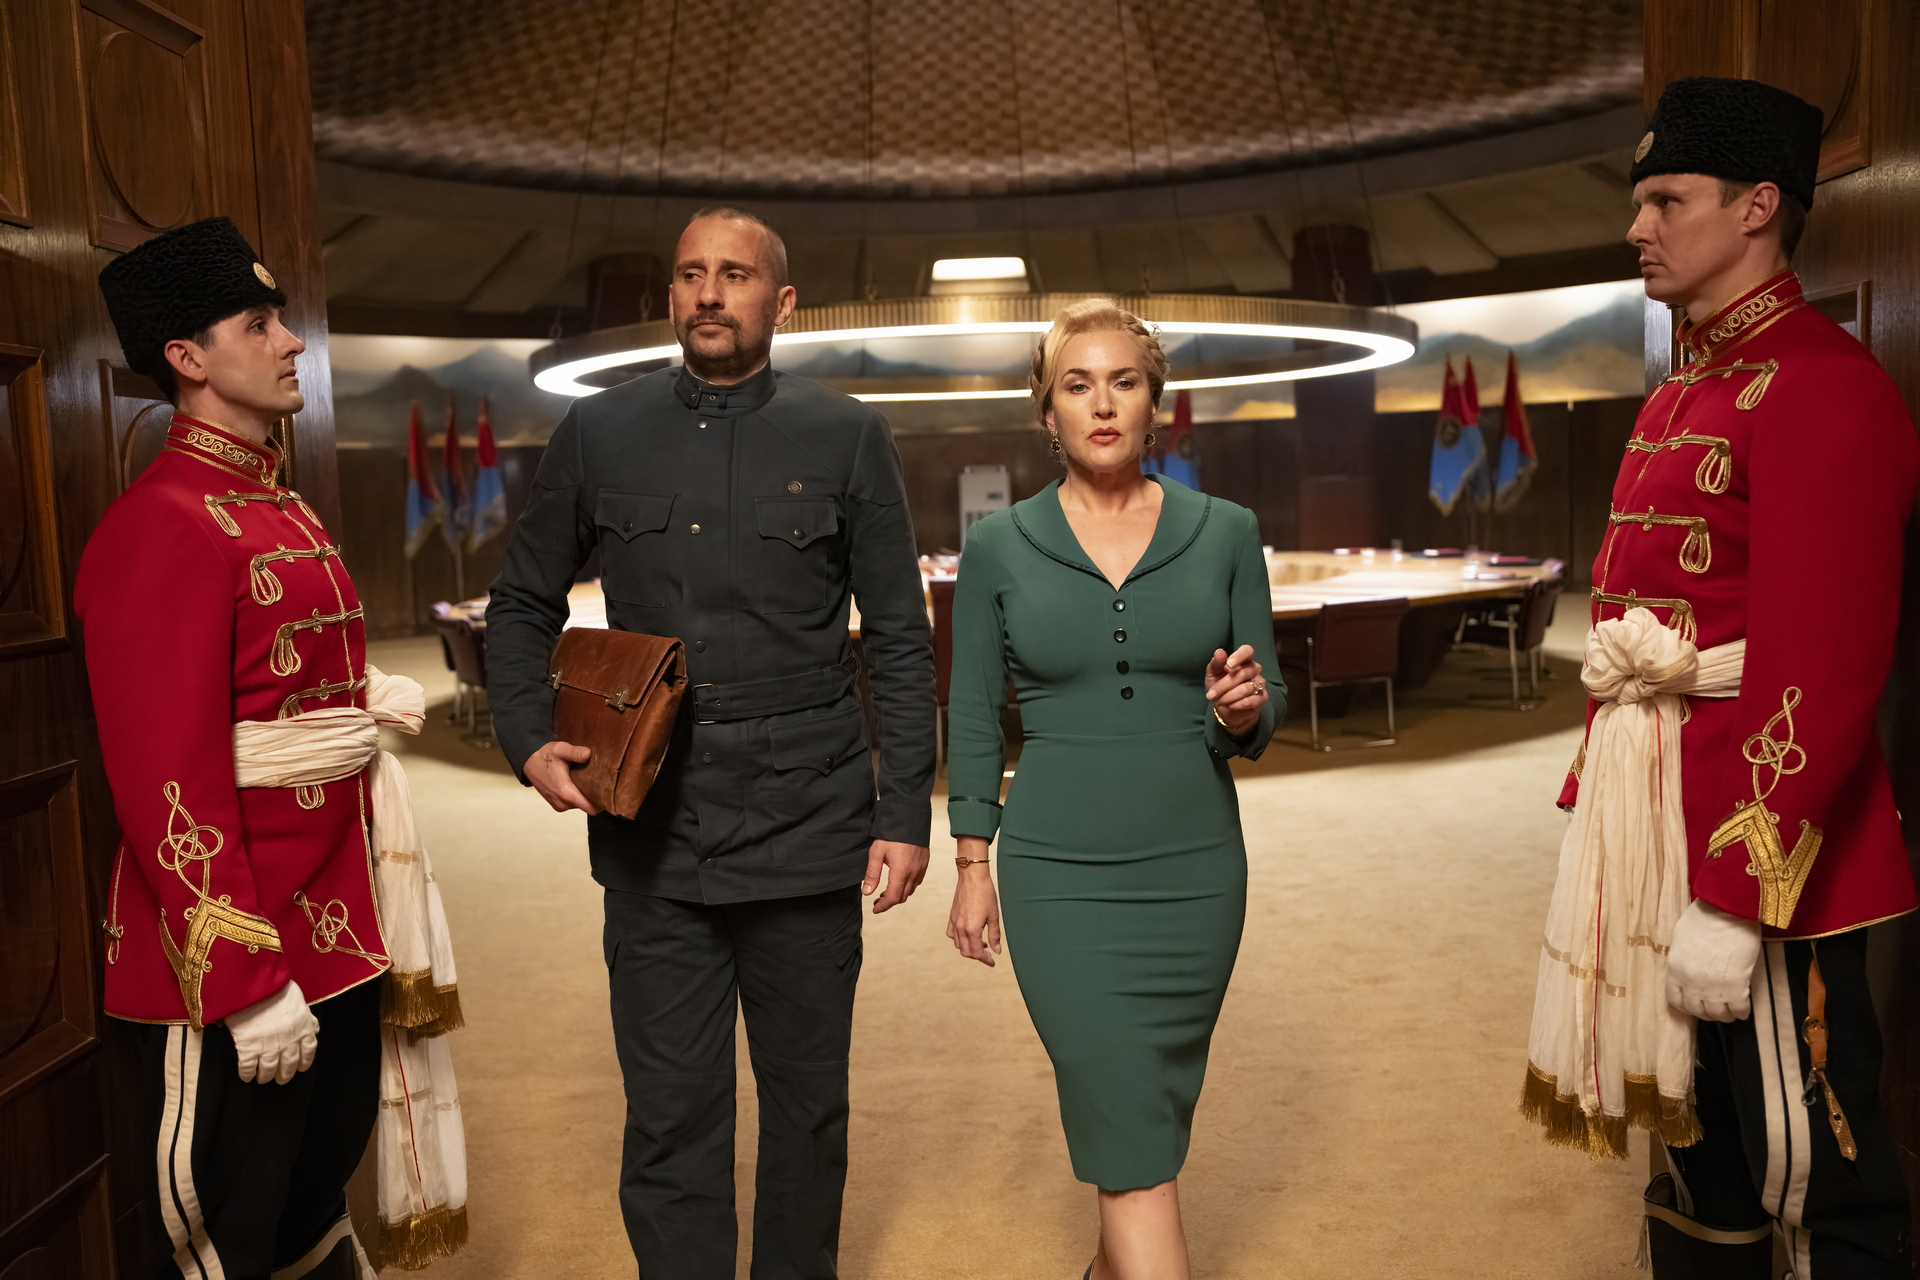 Matthias Schoenaerts as Corporal Herbert Zubak and Kate Winslet as Chancellor Elena Vernham in Will Tracy's HBO political drama satire limited series, The Regime